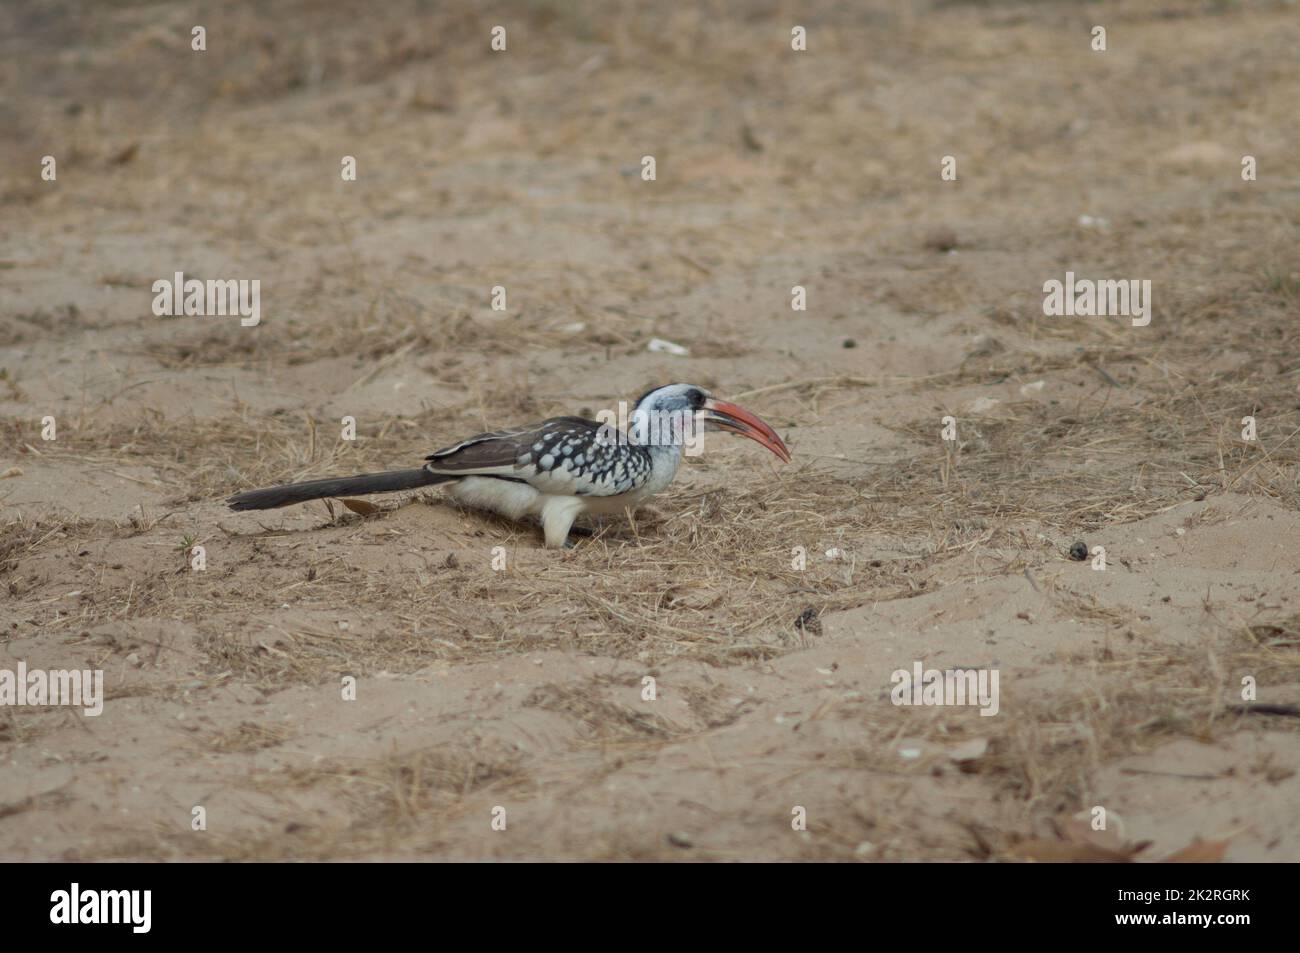 Northern red-billed hornbill in the Langue de Barbarie National Park. Stock Photo